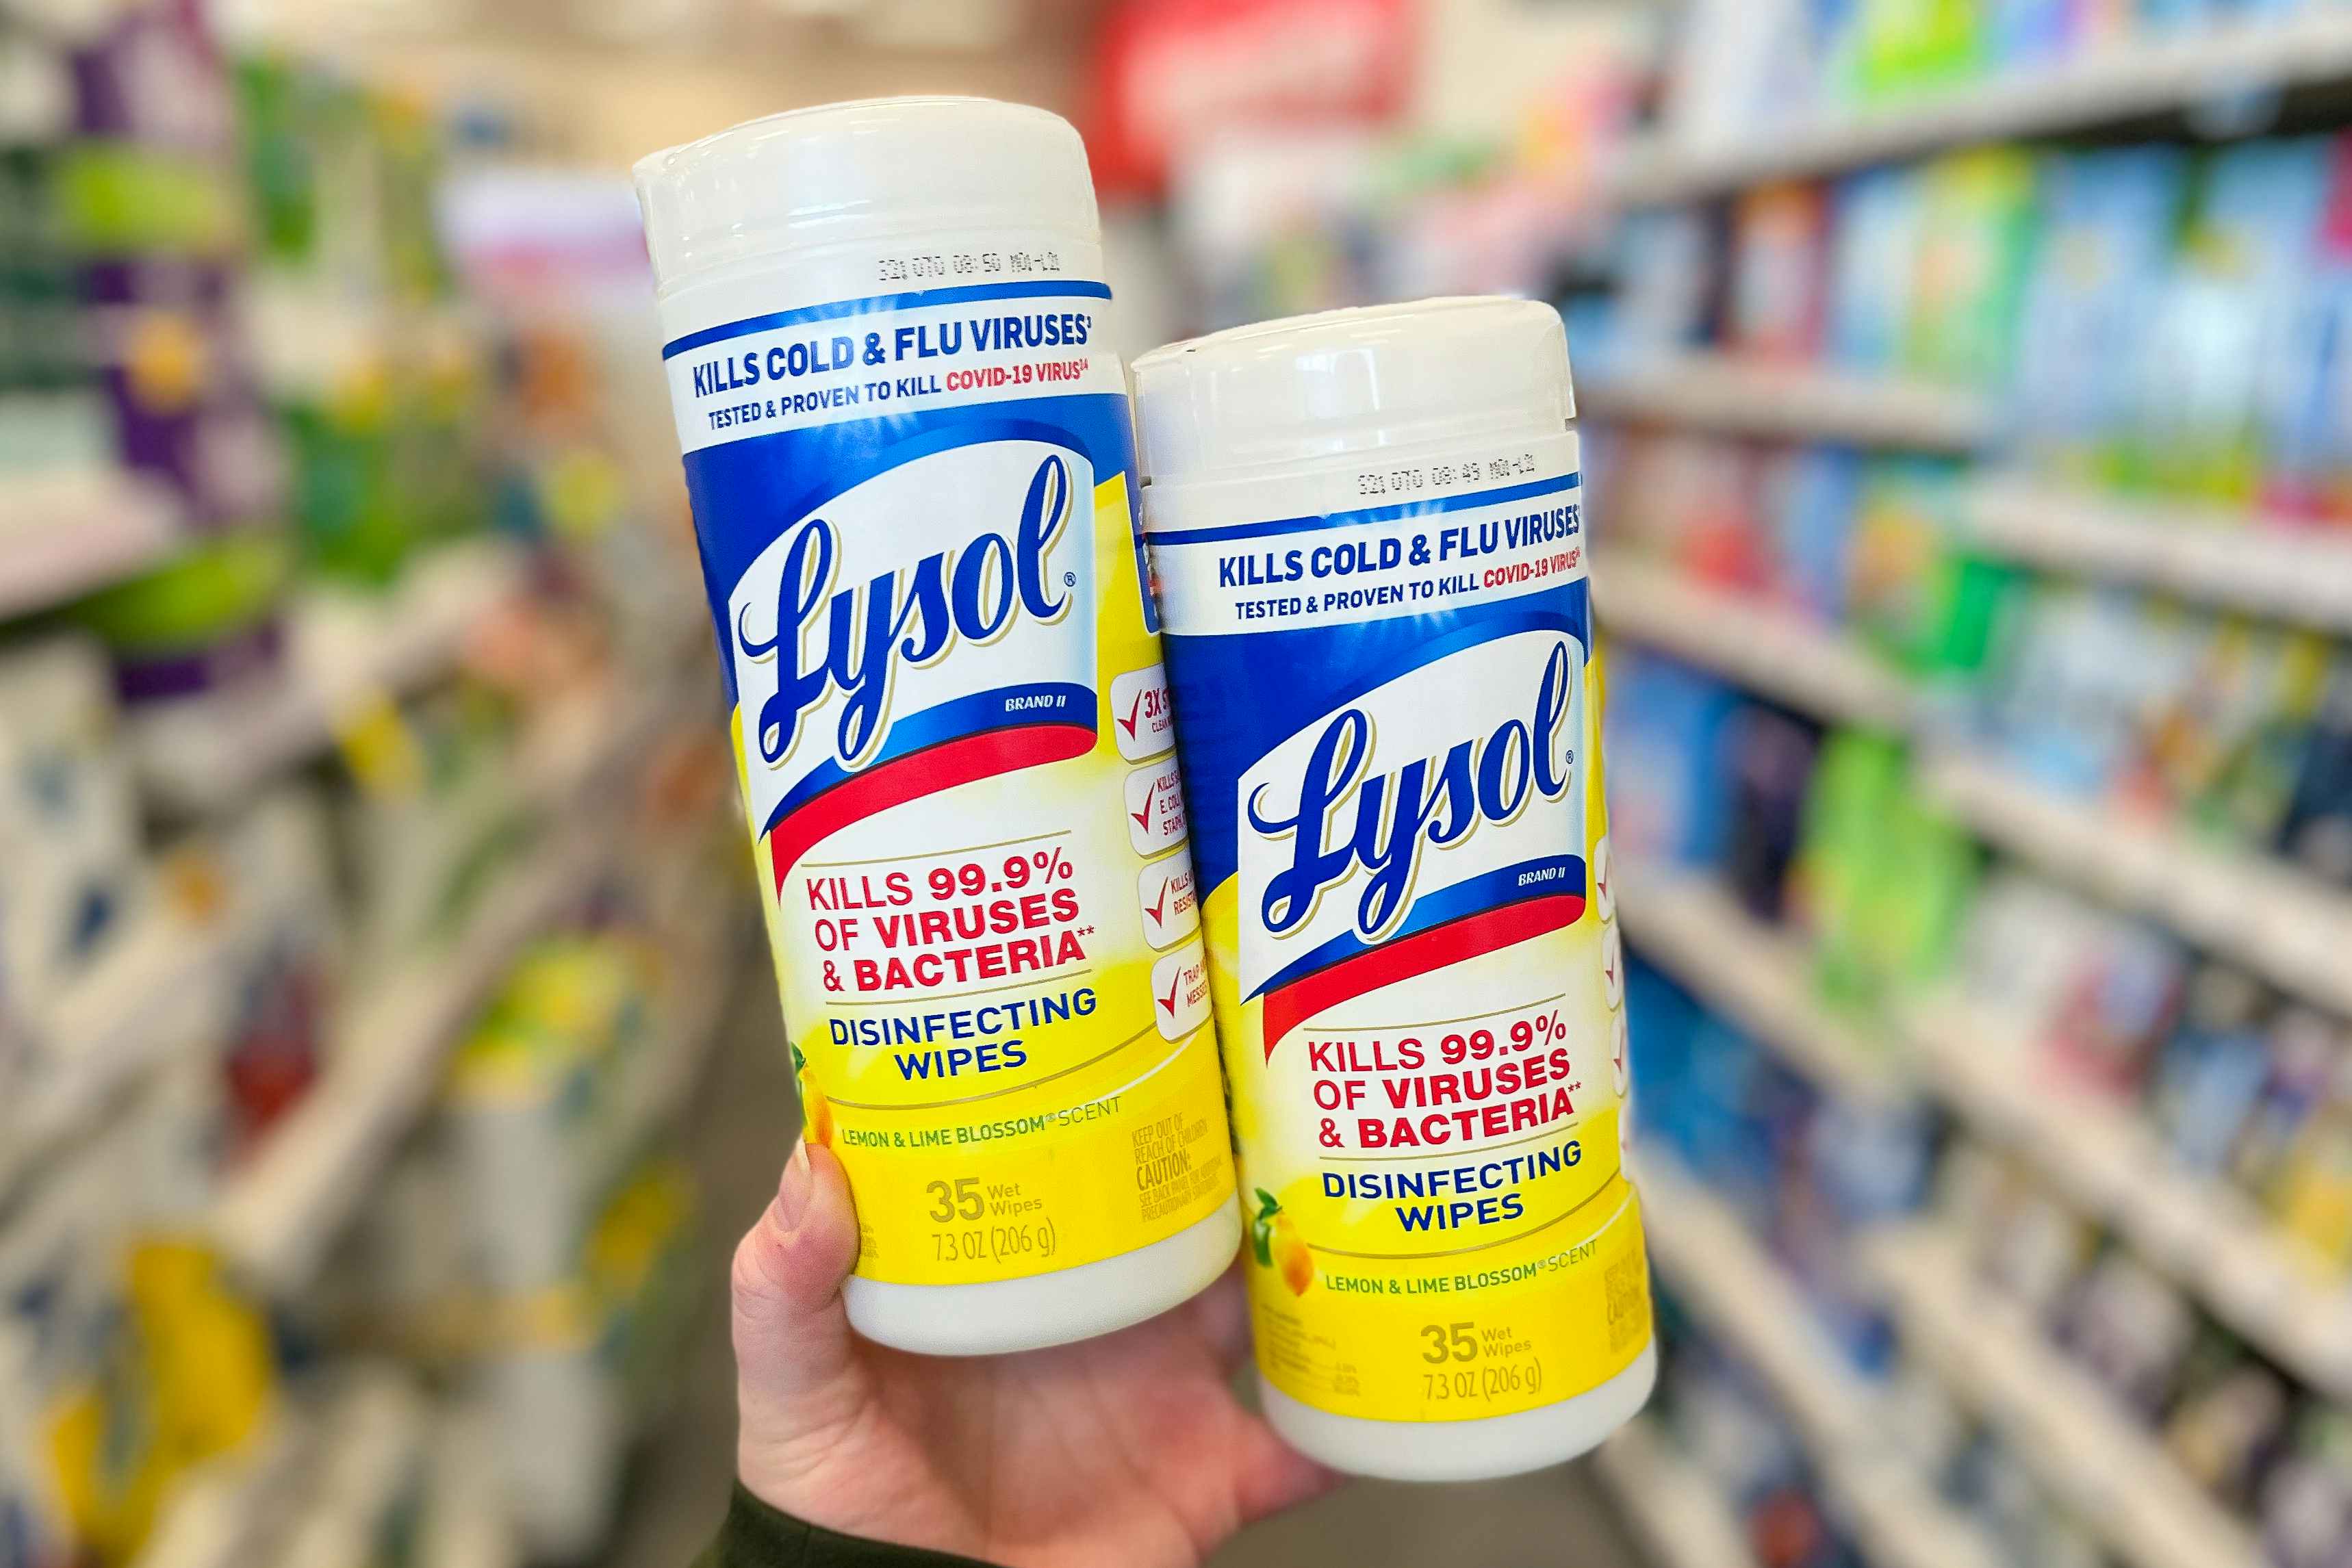  Lysol Disinfectant Wipes, as Low as $2.80 on Amazon